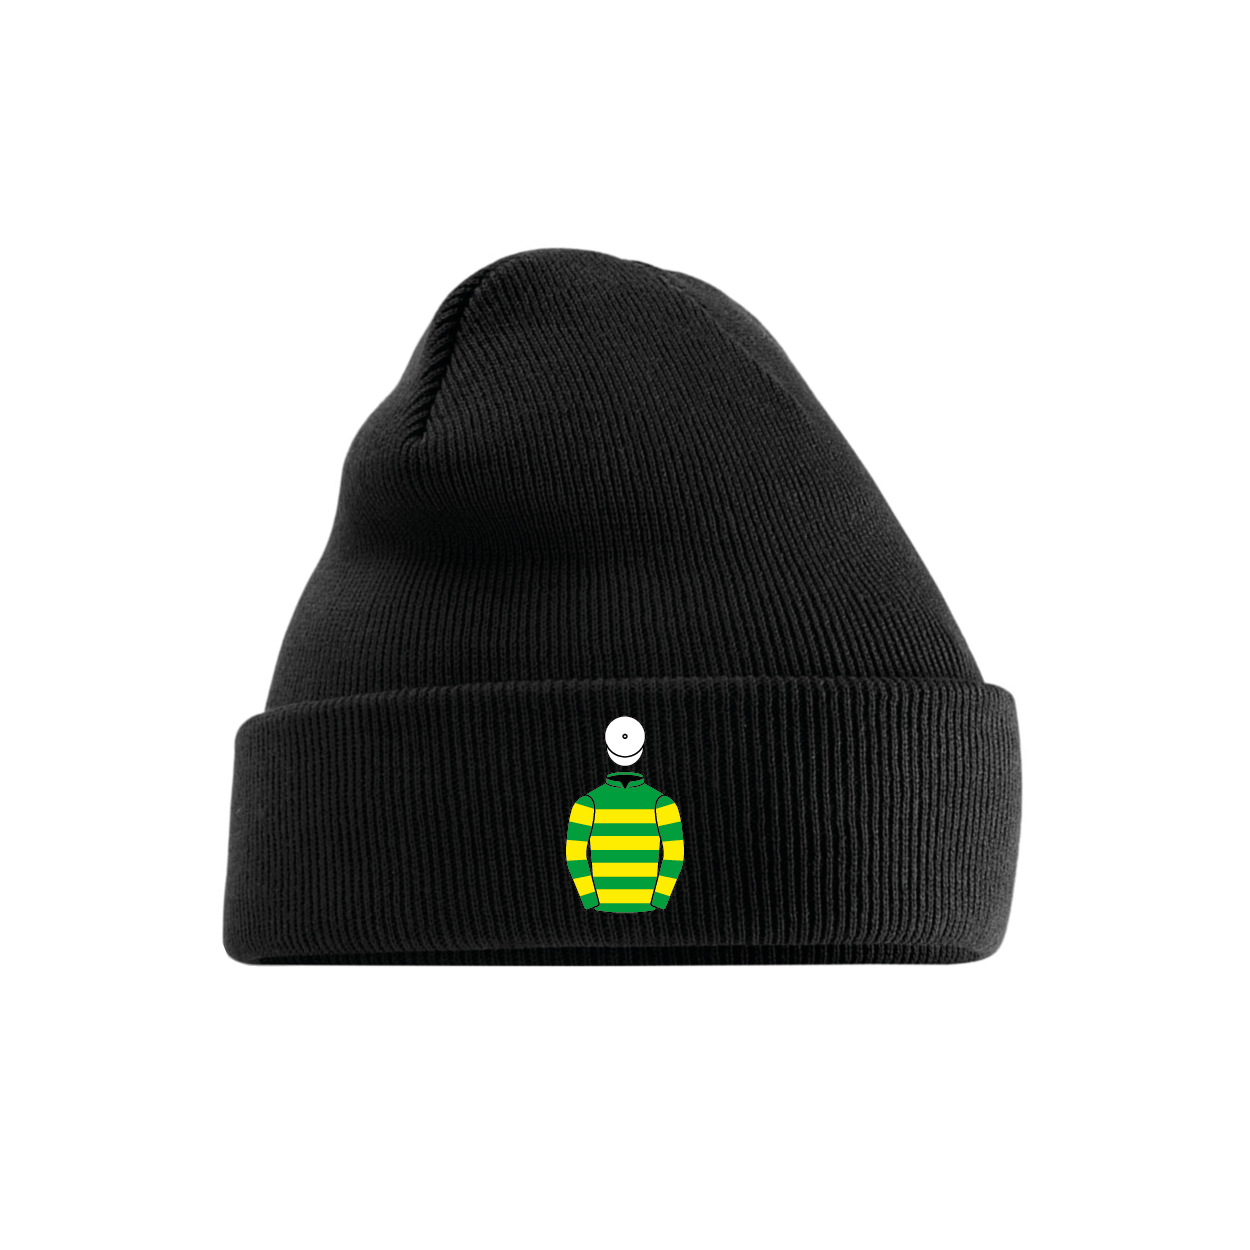 J P McManus Embroidered Cuffed Beanie - Hacked Up